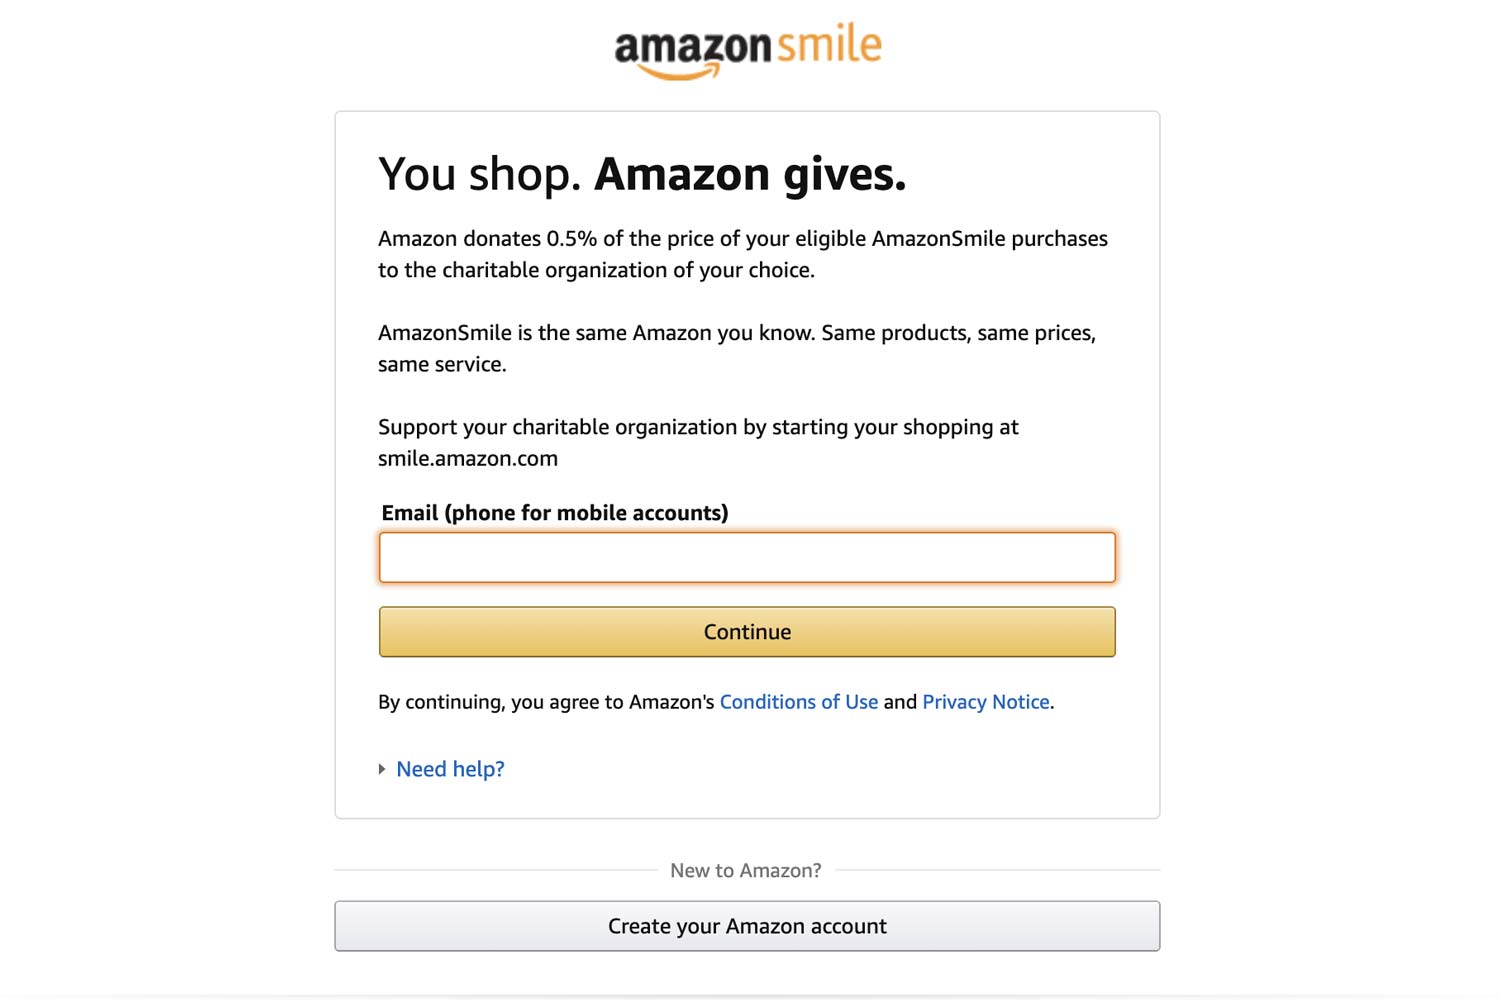 Step 1: Open smile.amazon.com on your browser and log in.